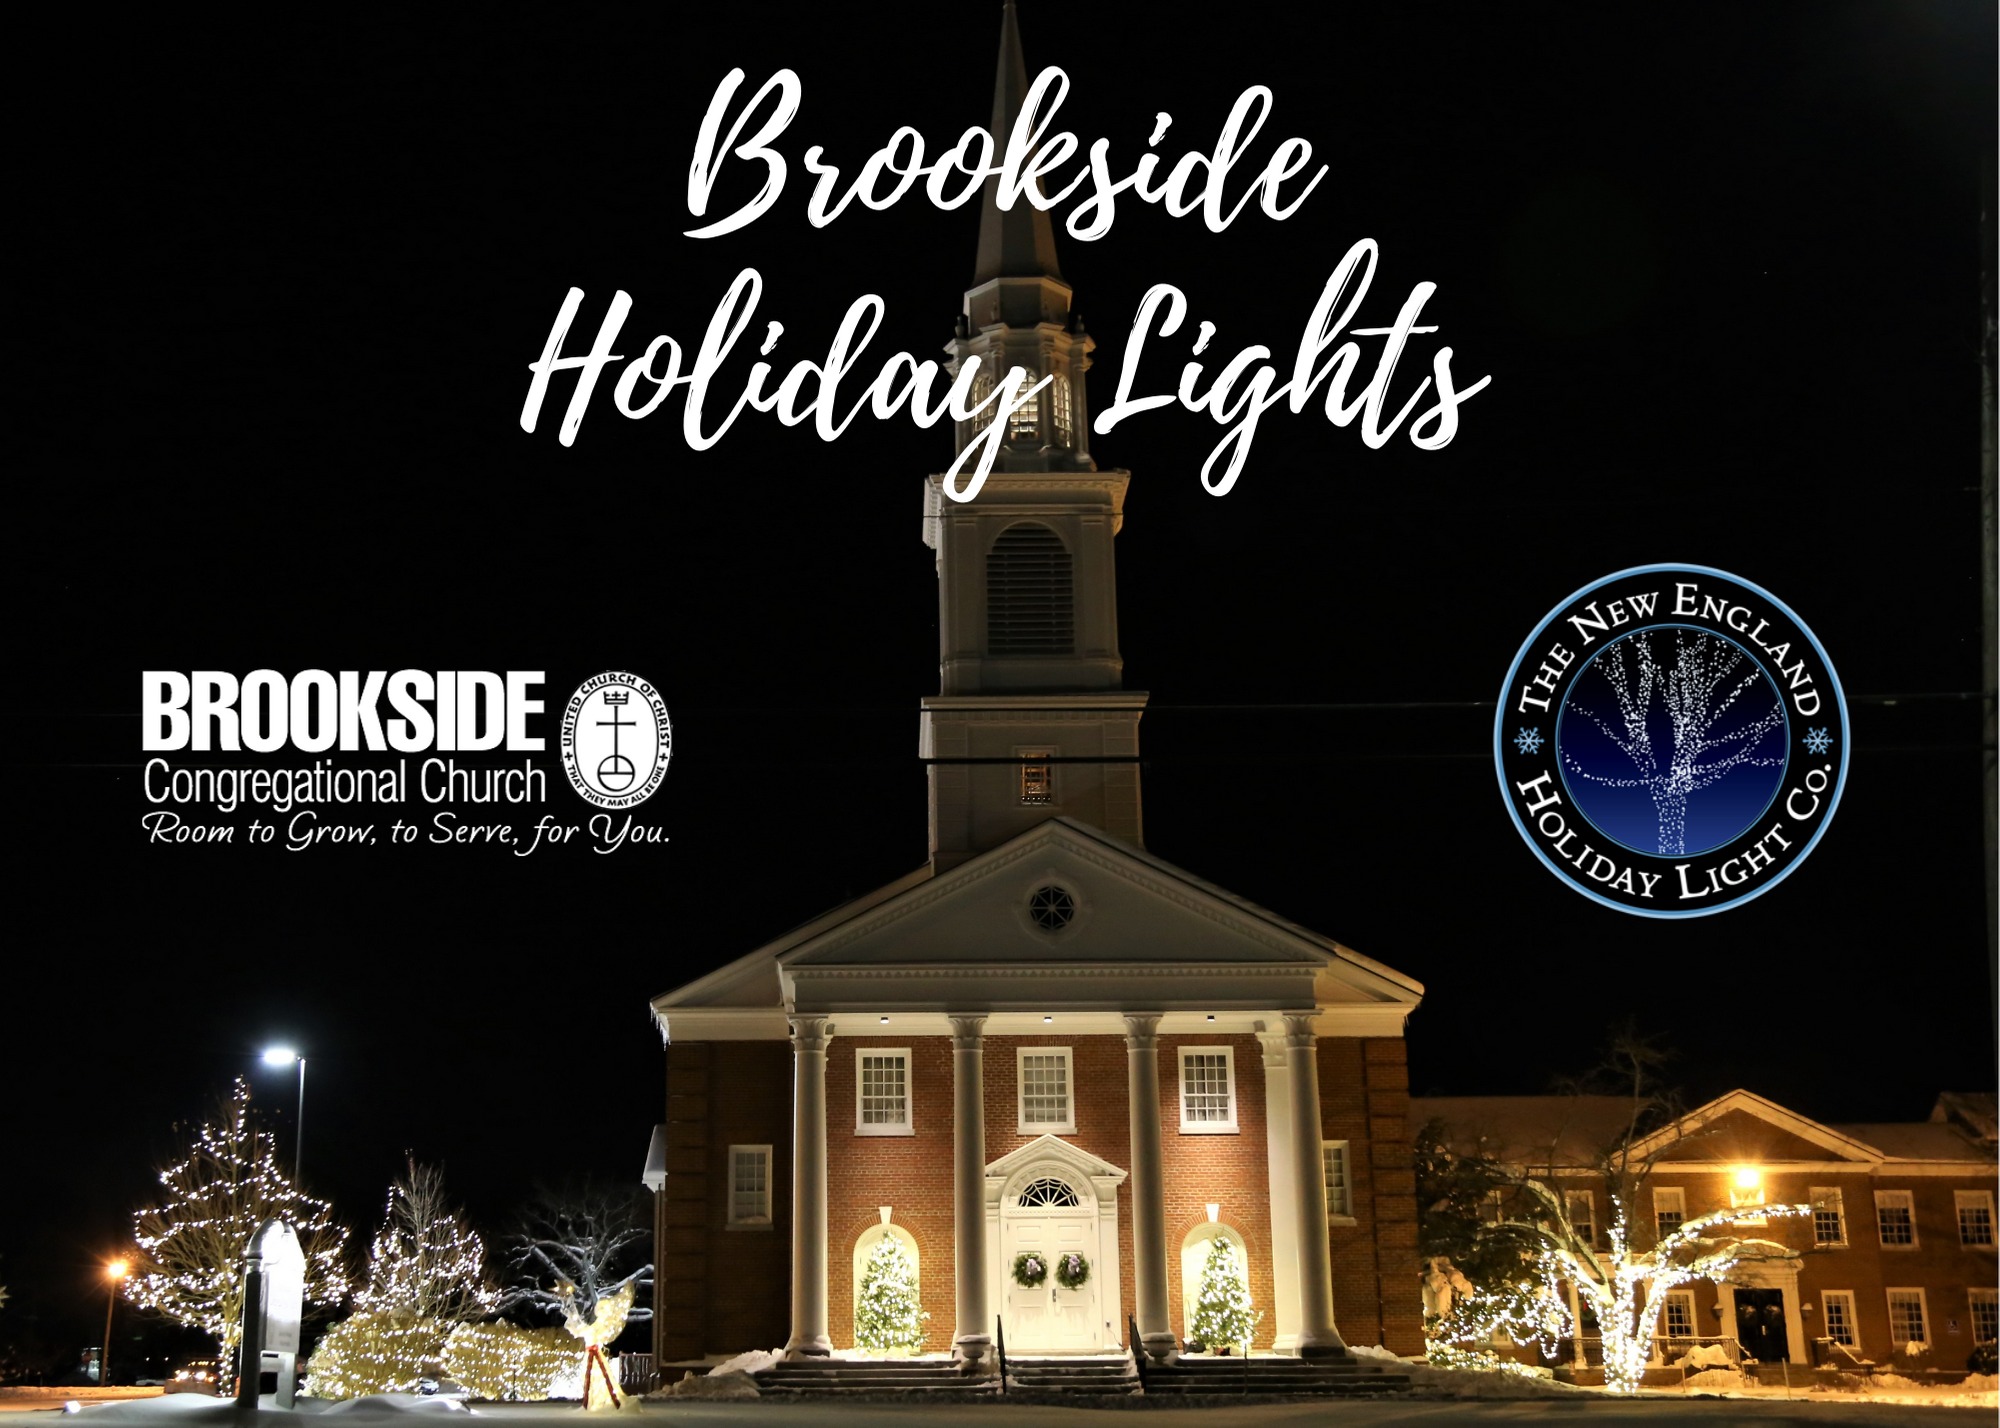 'Walk in the Light' this Christmas at Brookside Church and honor or